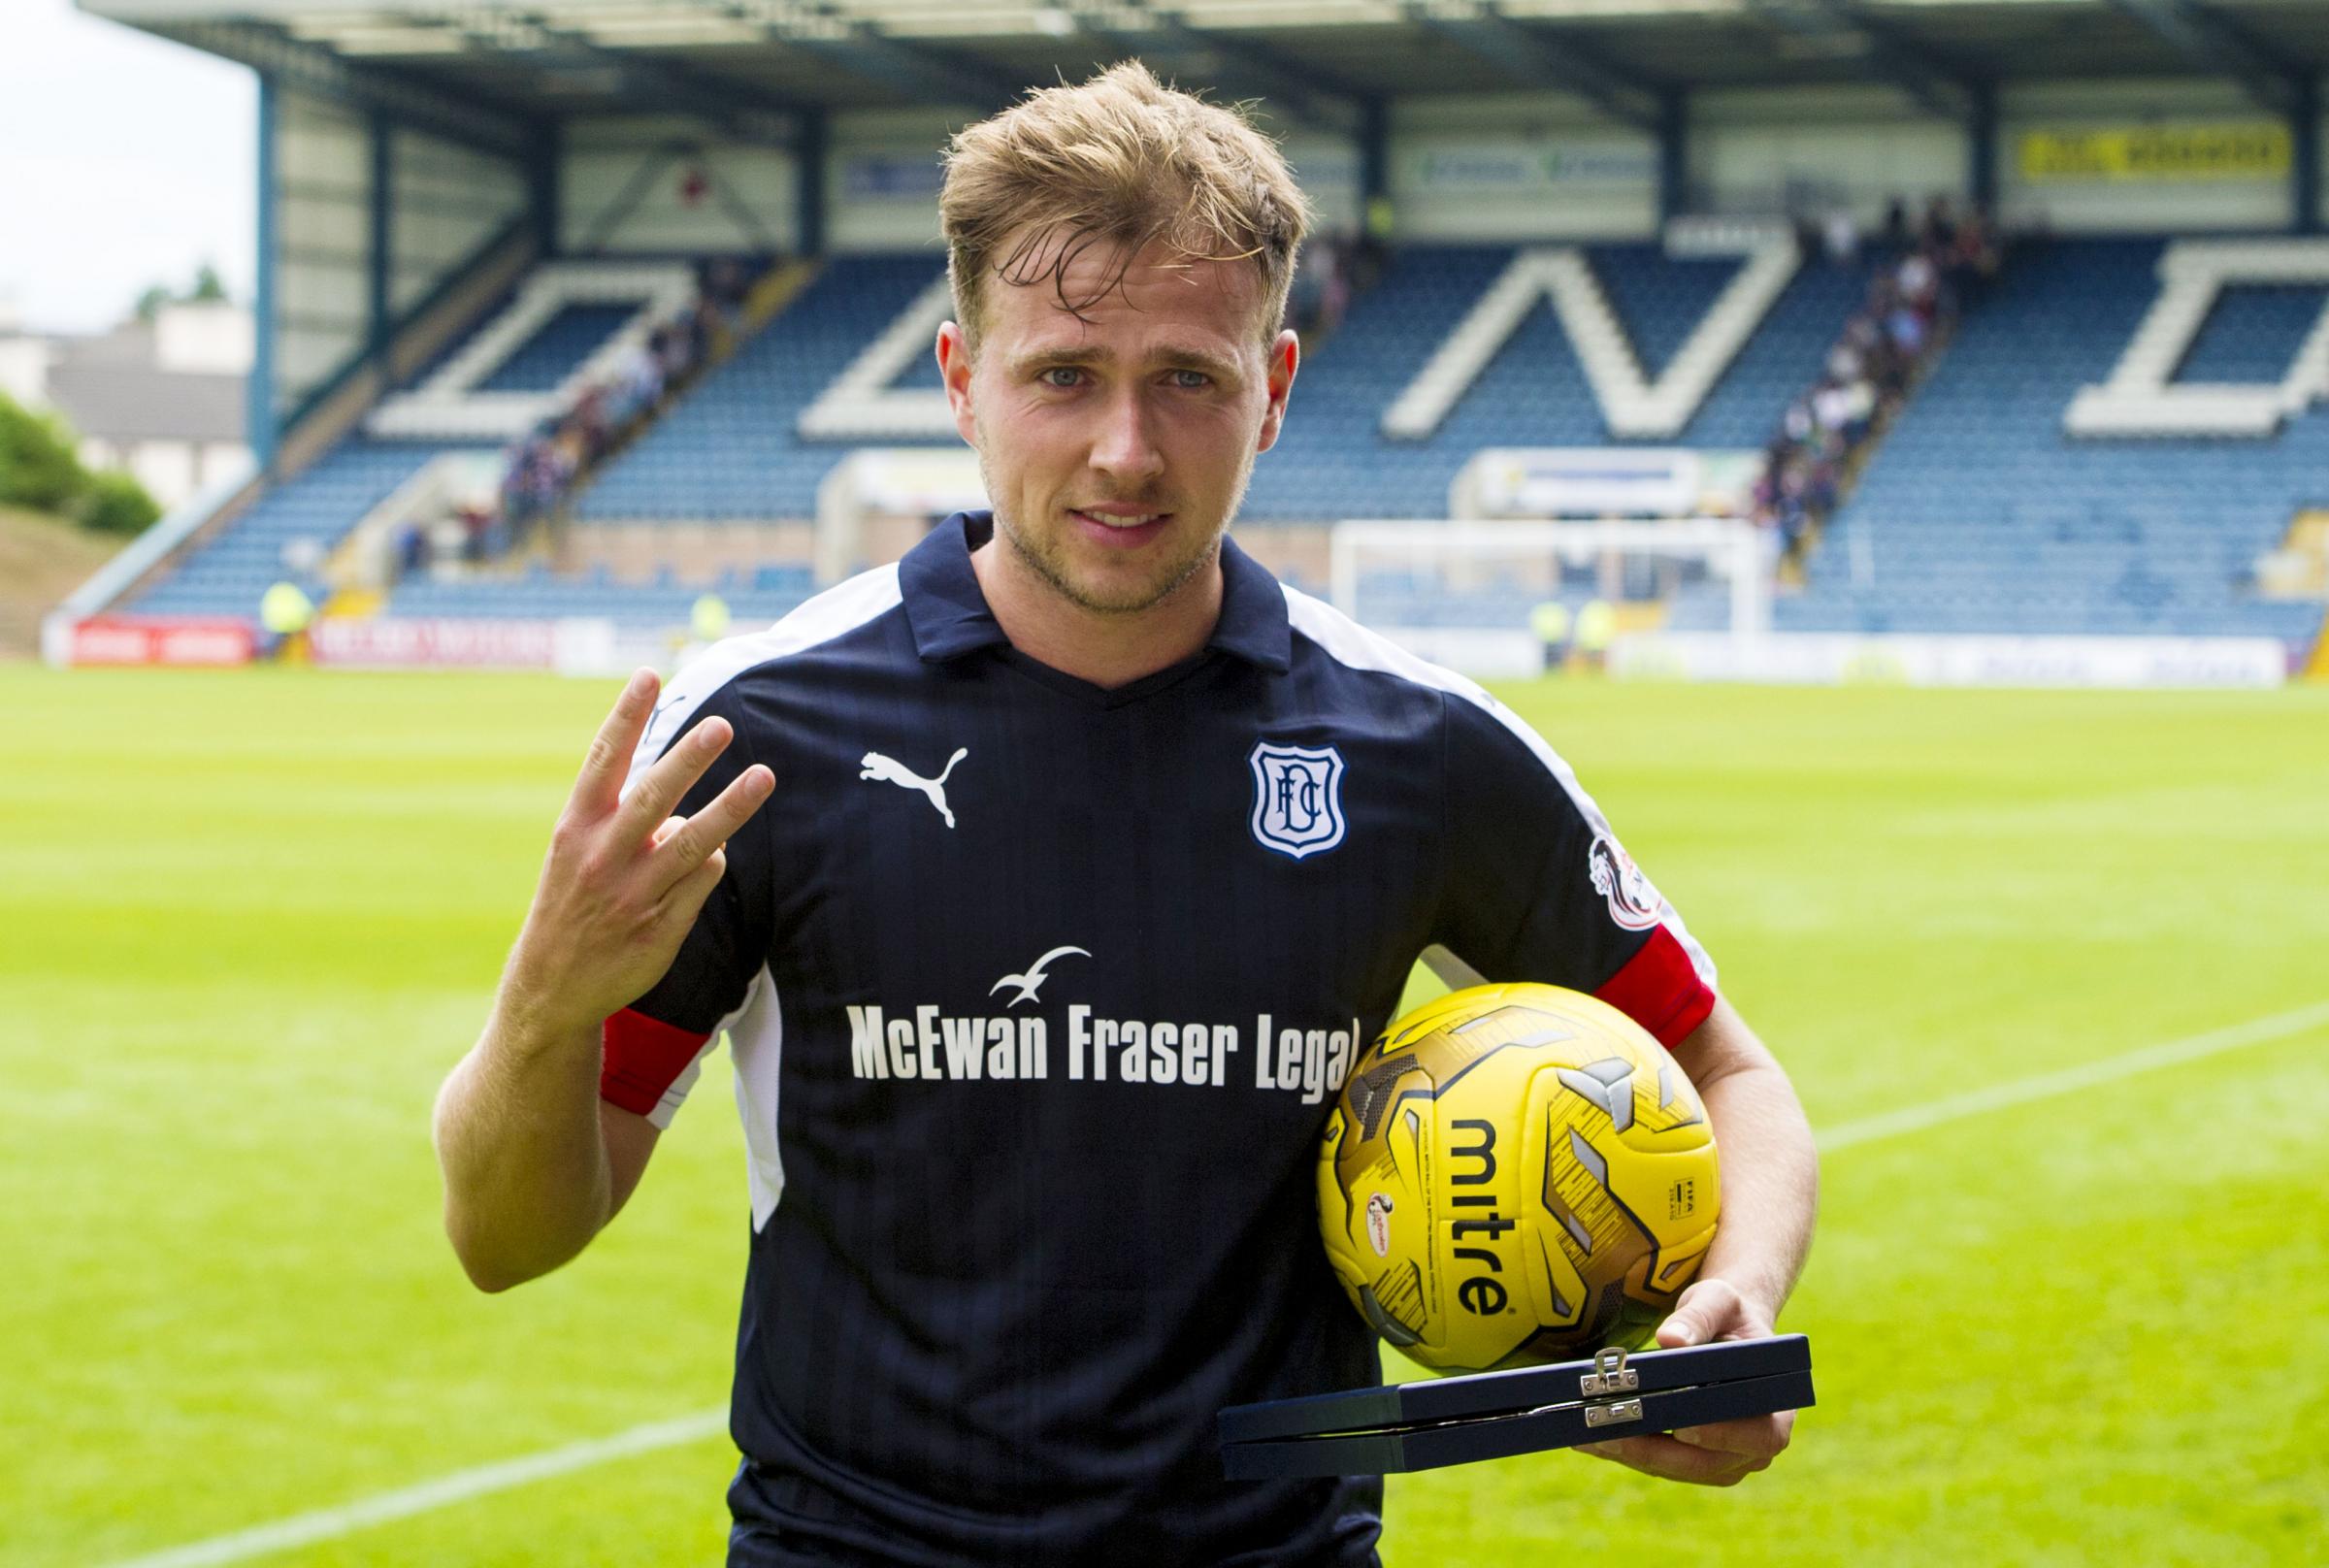 Dundee forward Greg Stewart heads for Birmingham City medical after  agreeing personal terms | HeraldScotland